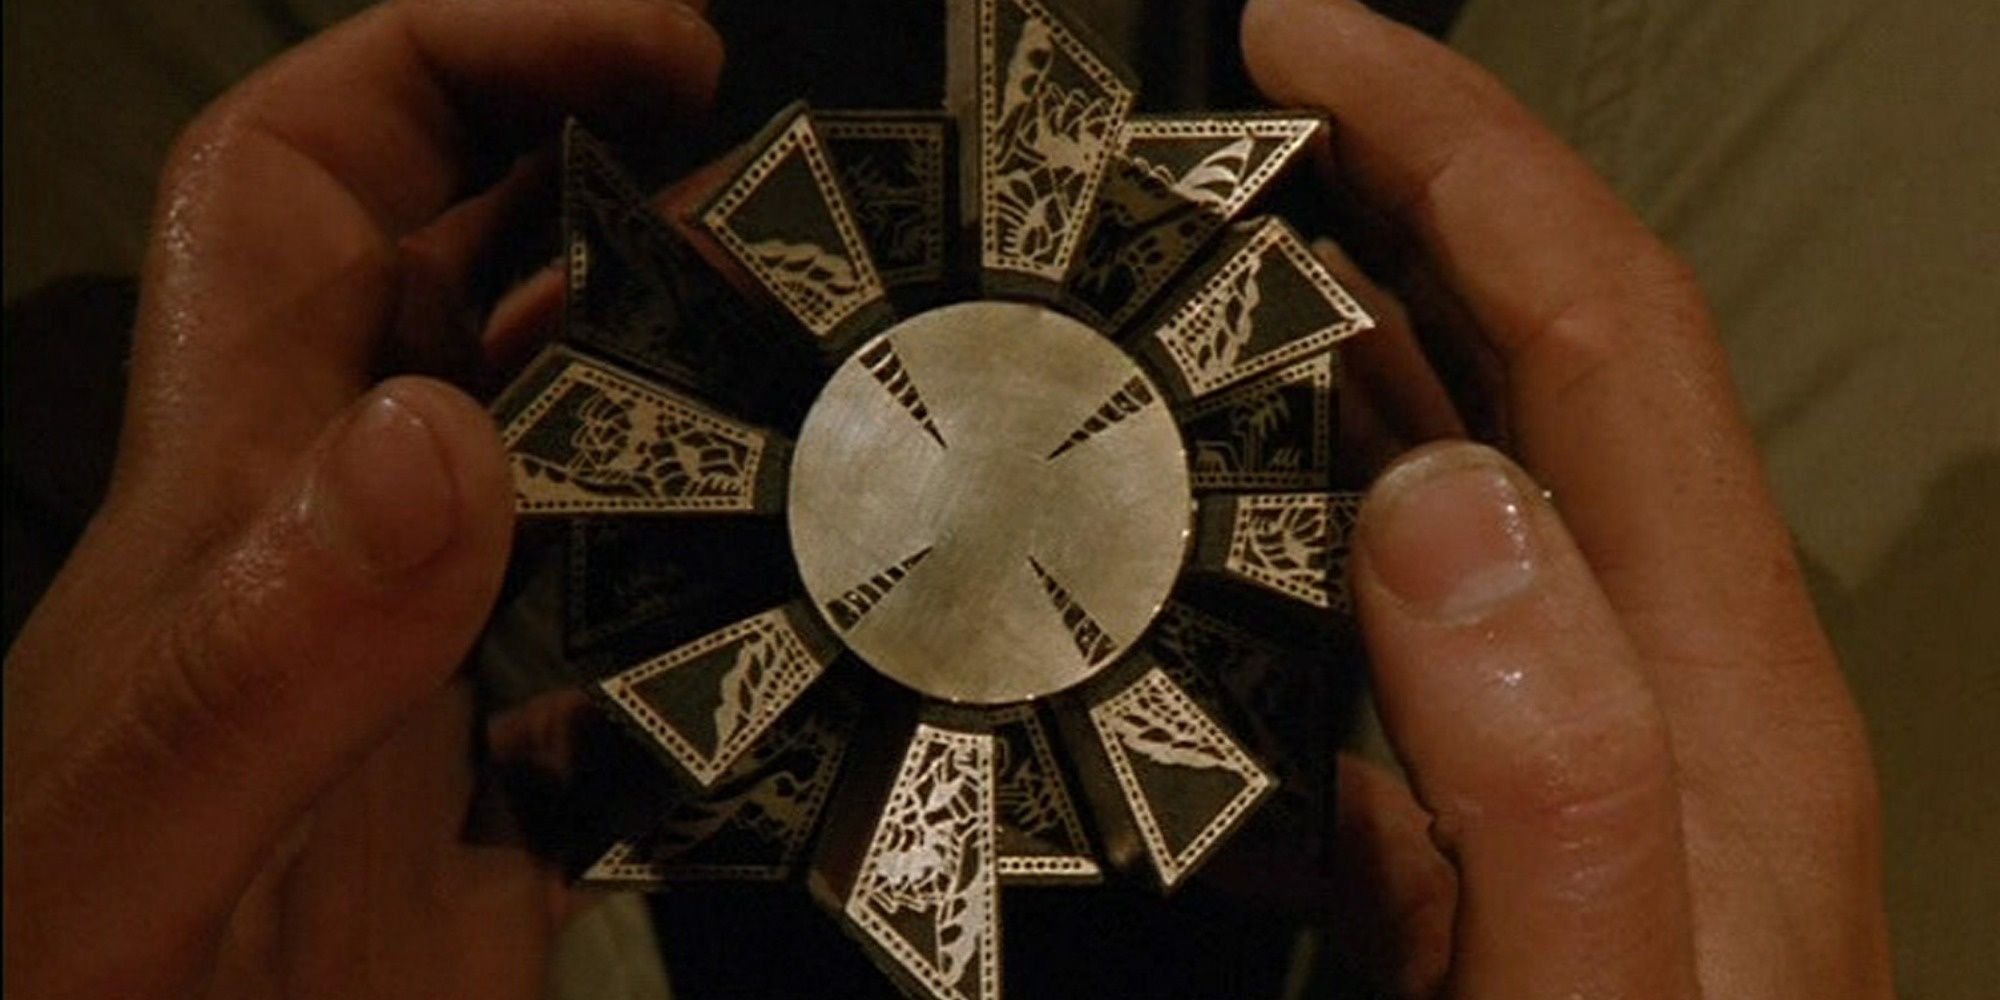 The Lament Configuration in Hellraiser